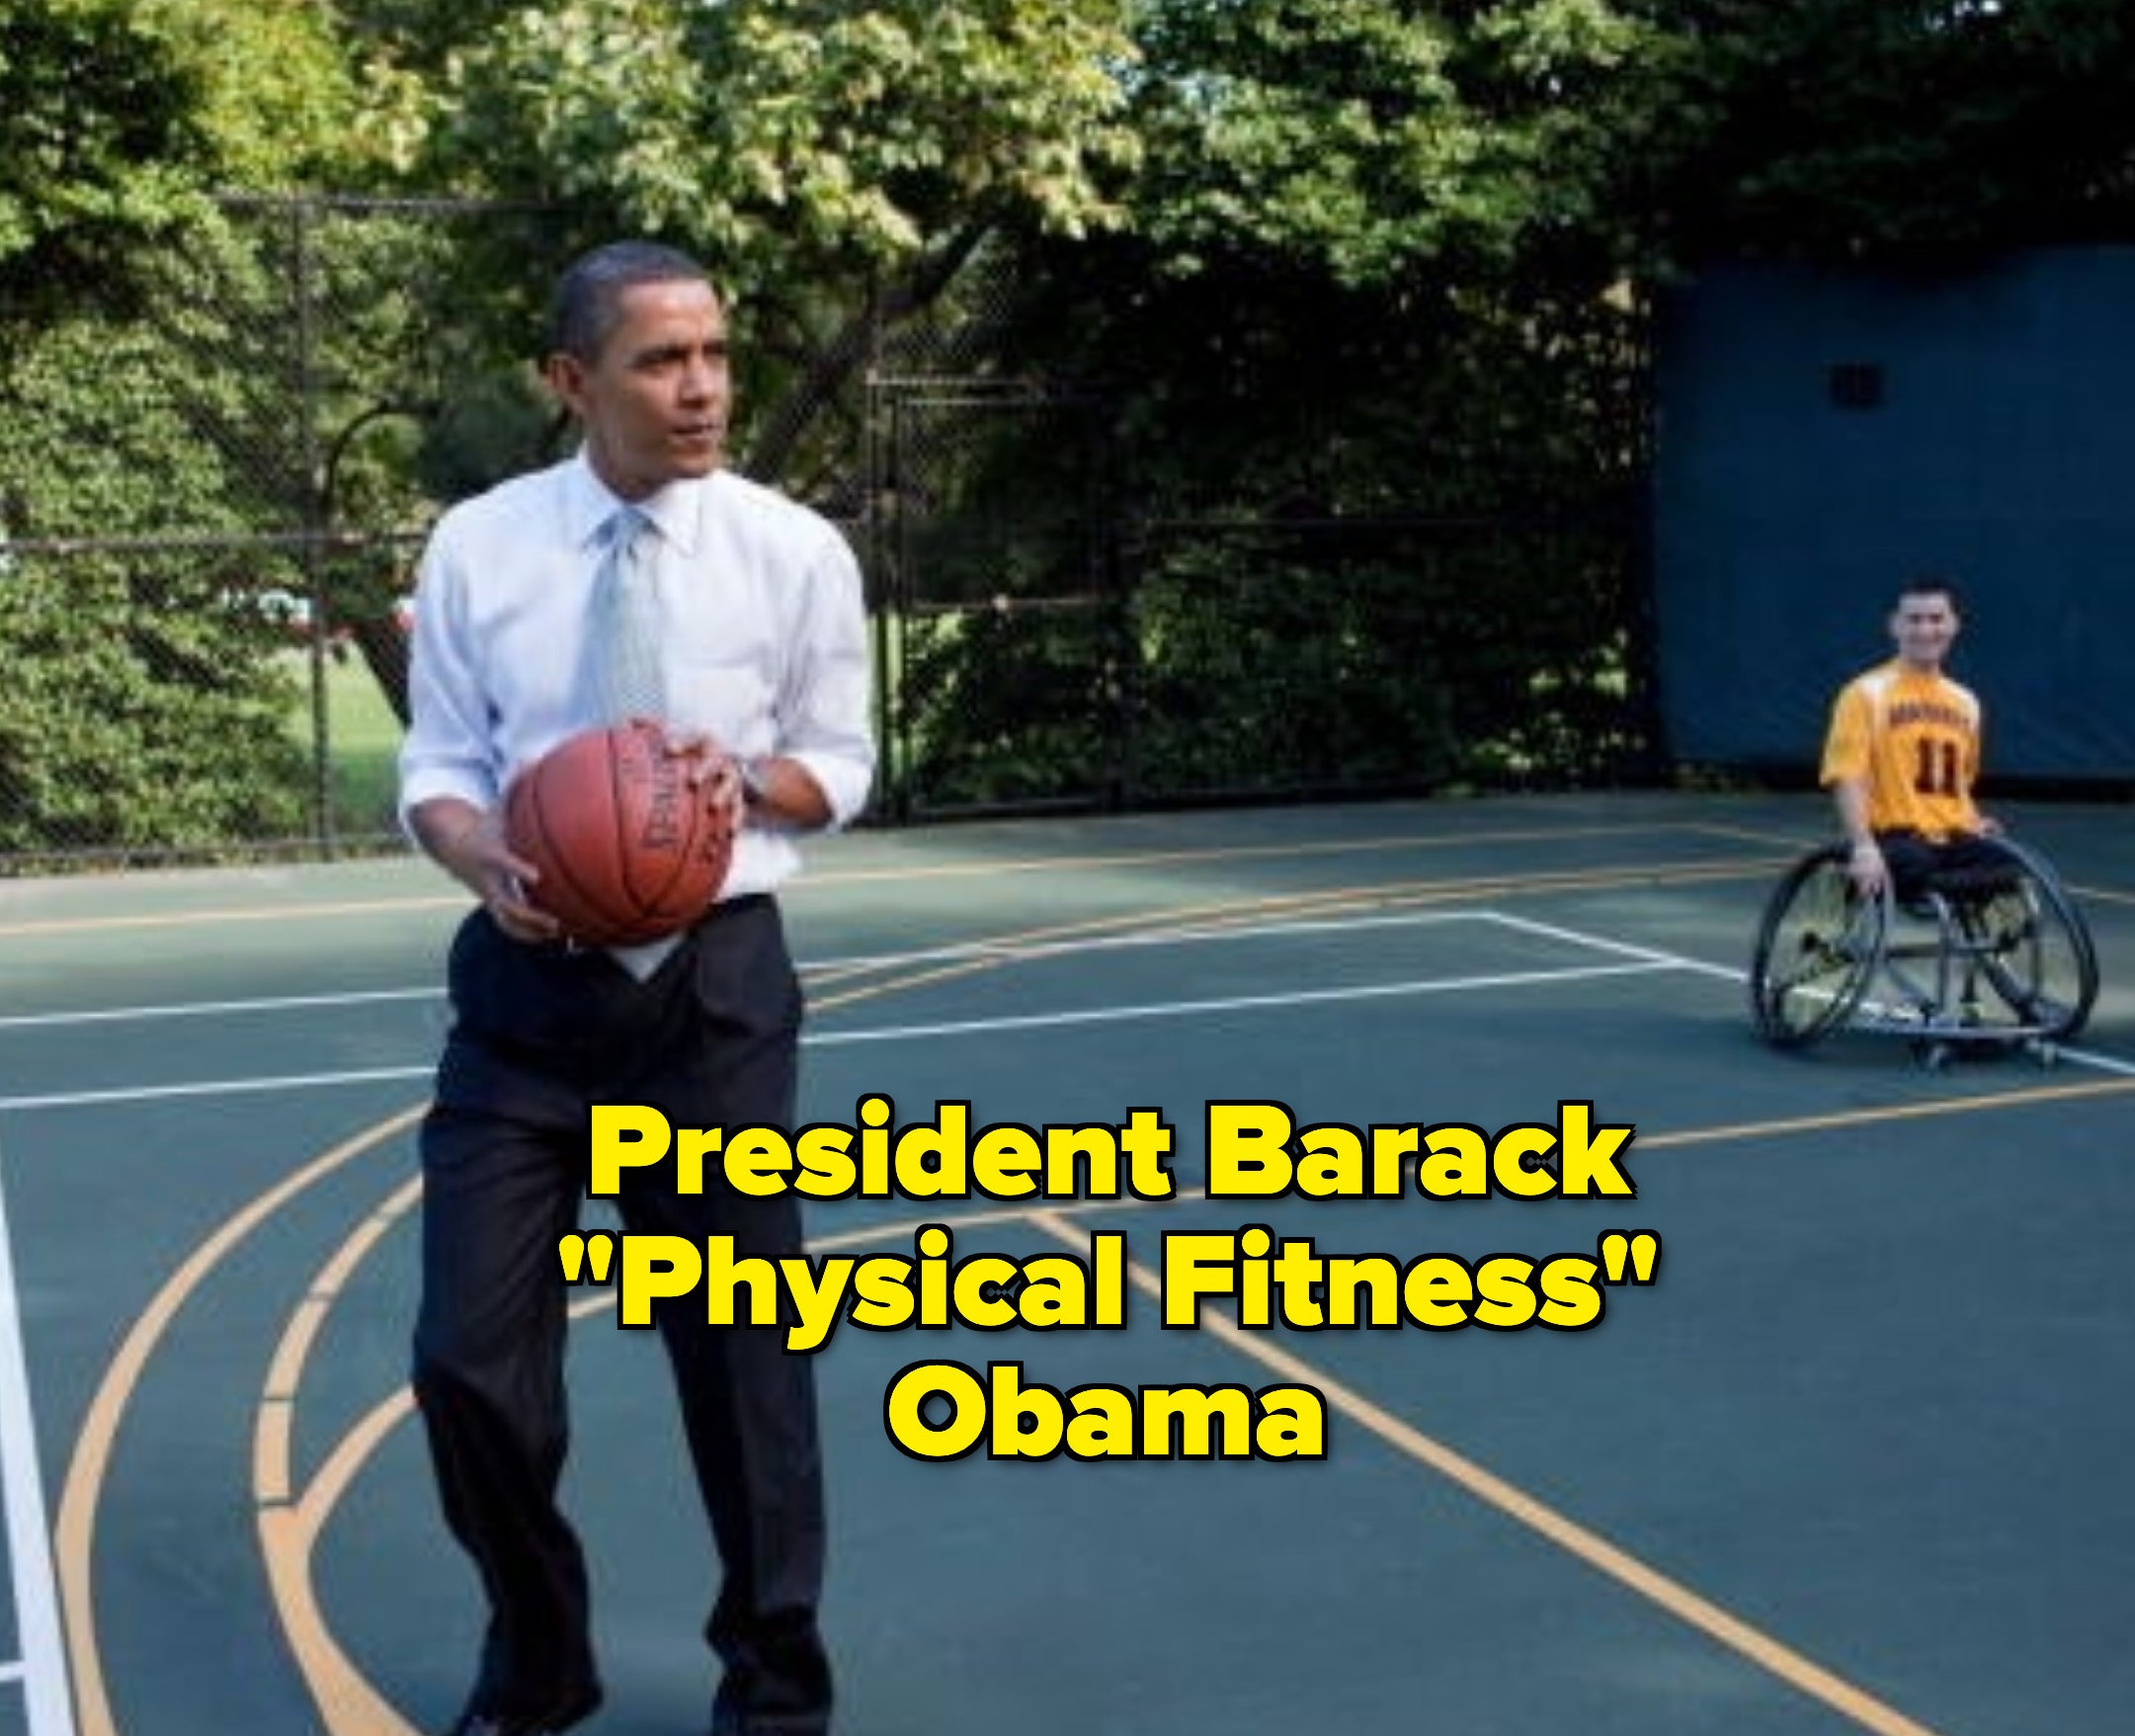 President Obama on a basketball court holding the ball with the caption President Barack &quot;Physical Fitness&quot; Obama